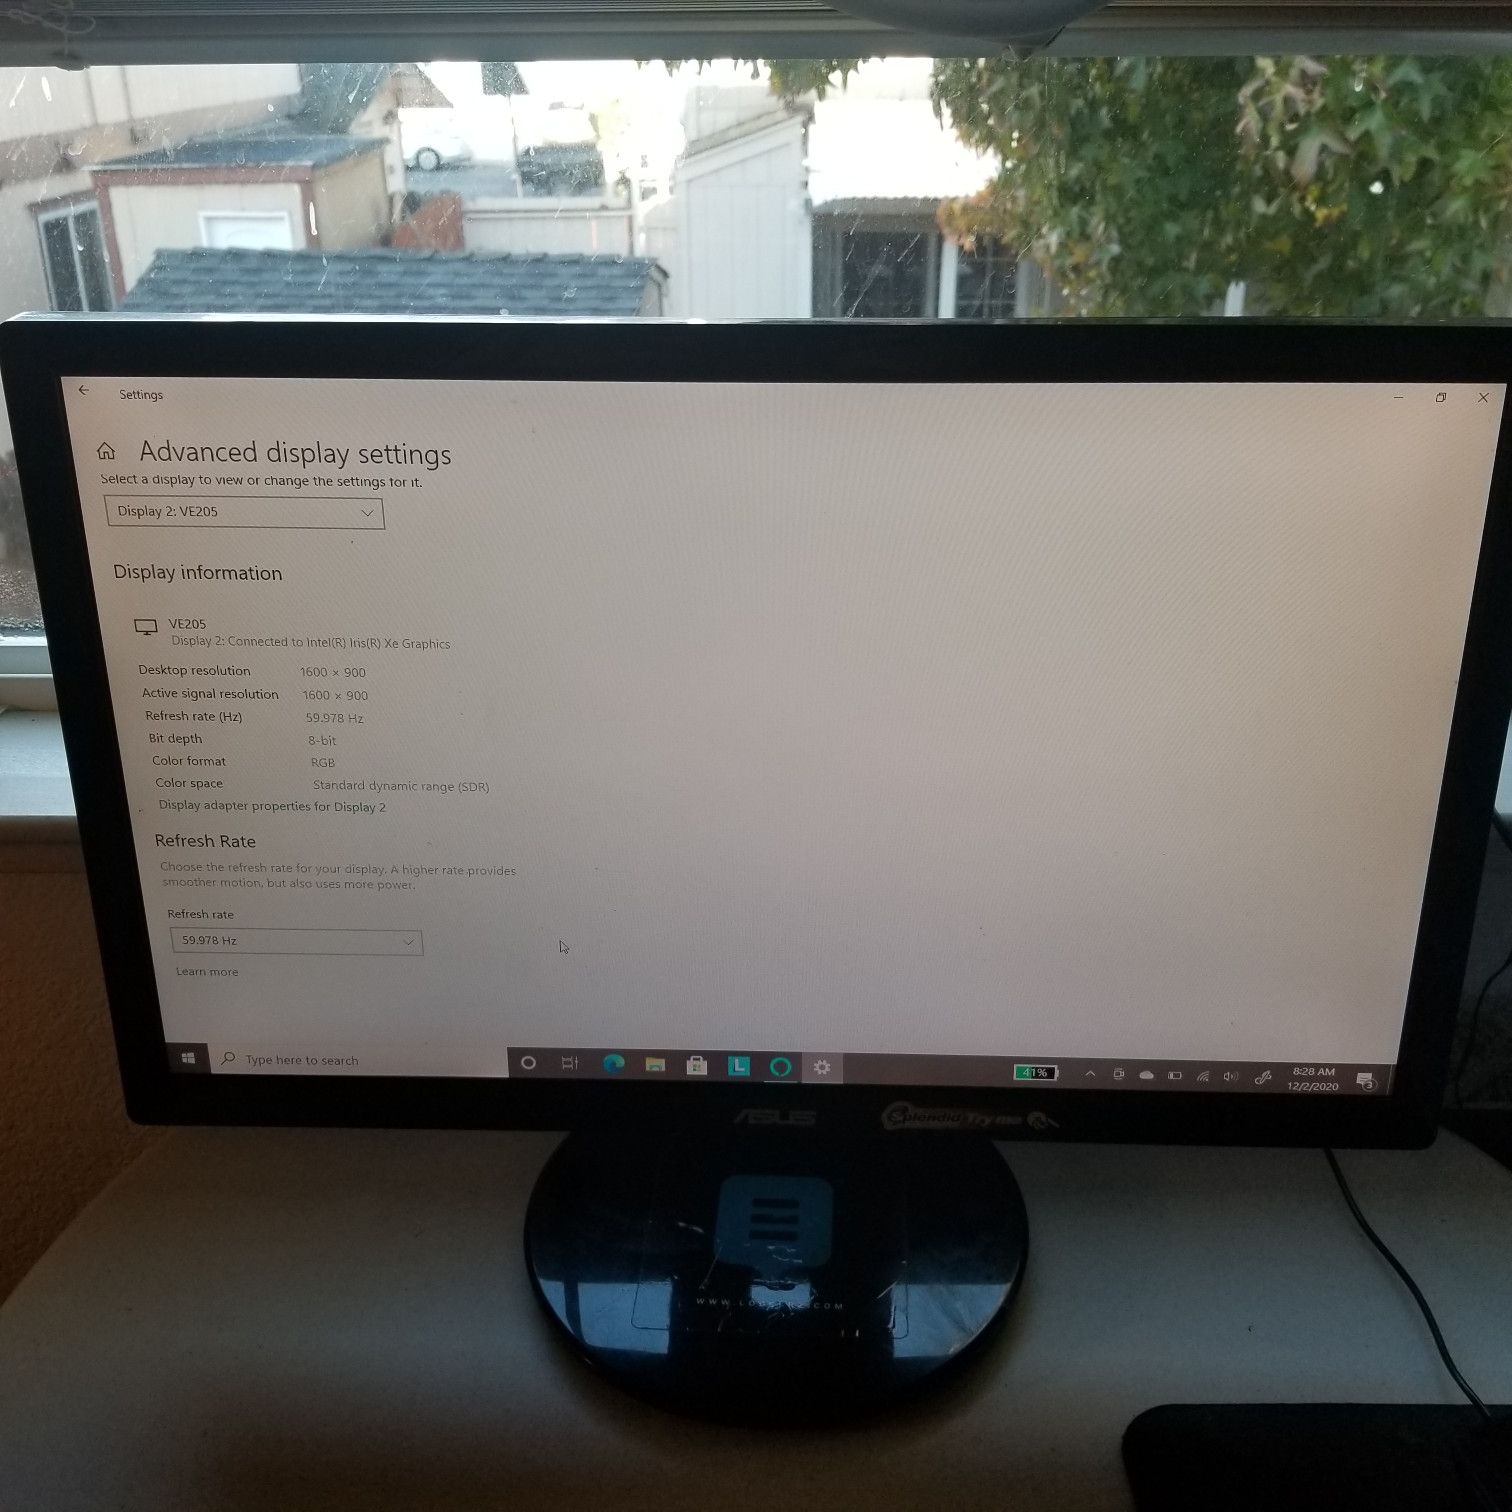 Asus VE205T 20" Widescreen LCD Computer Monitor